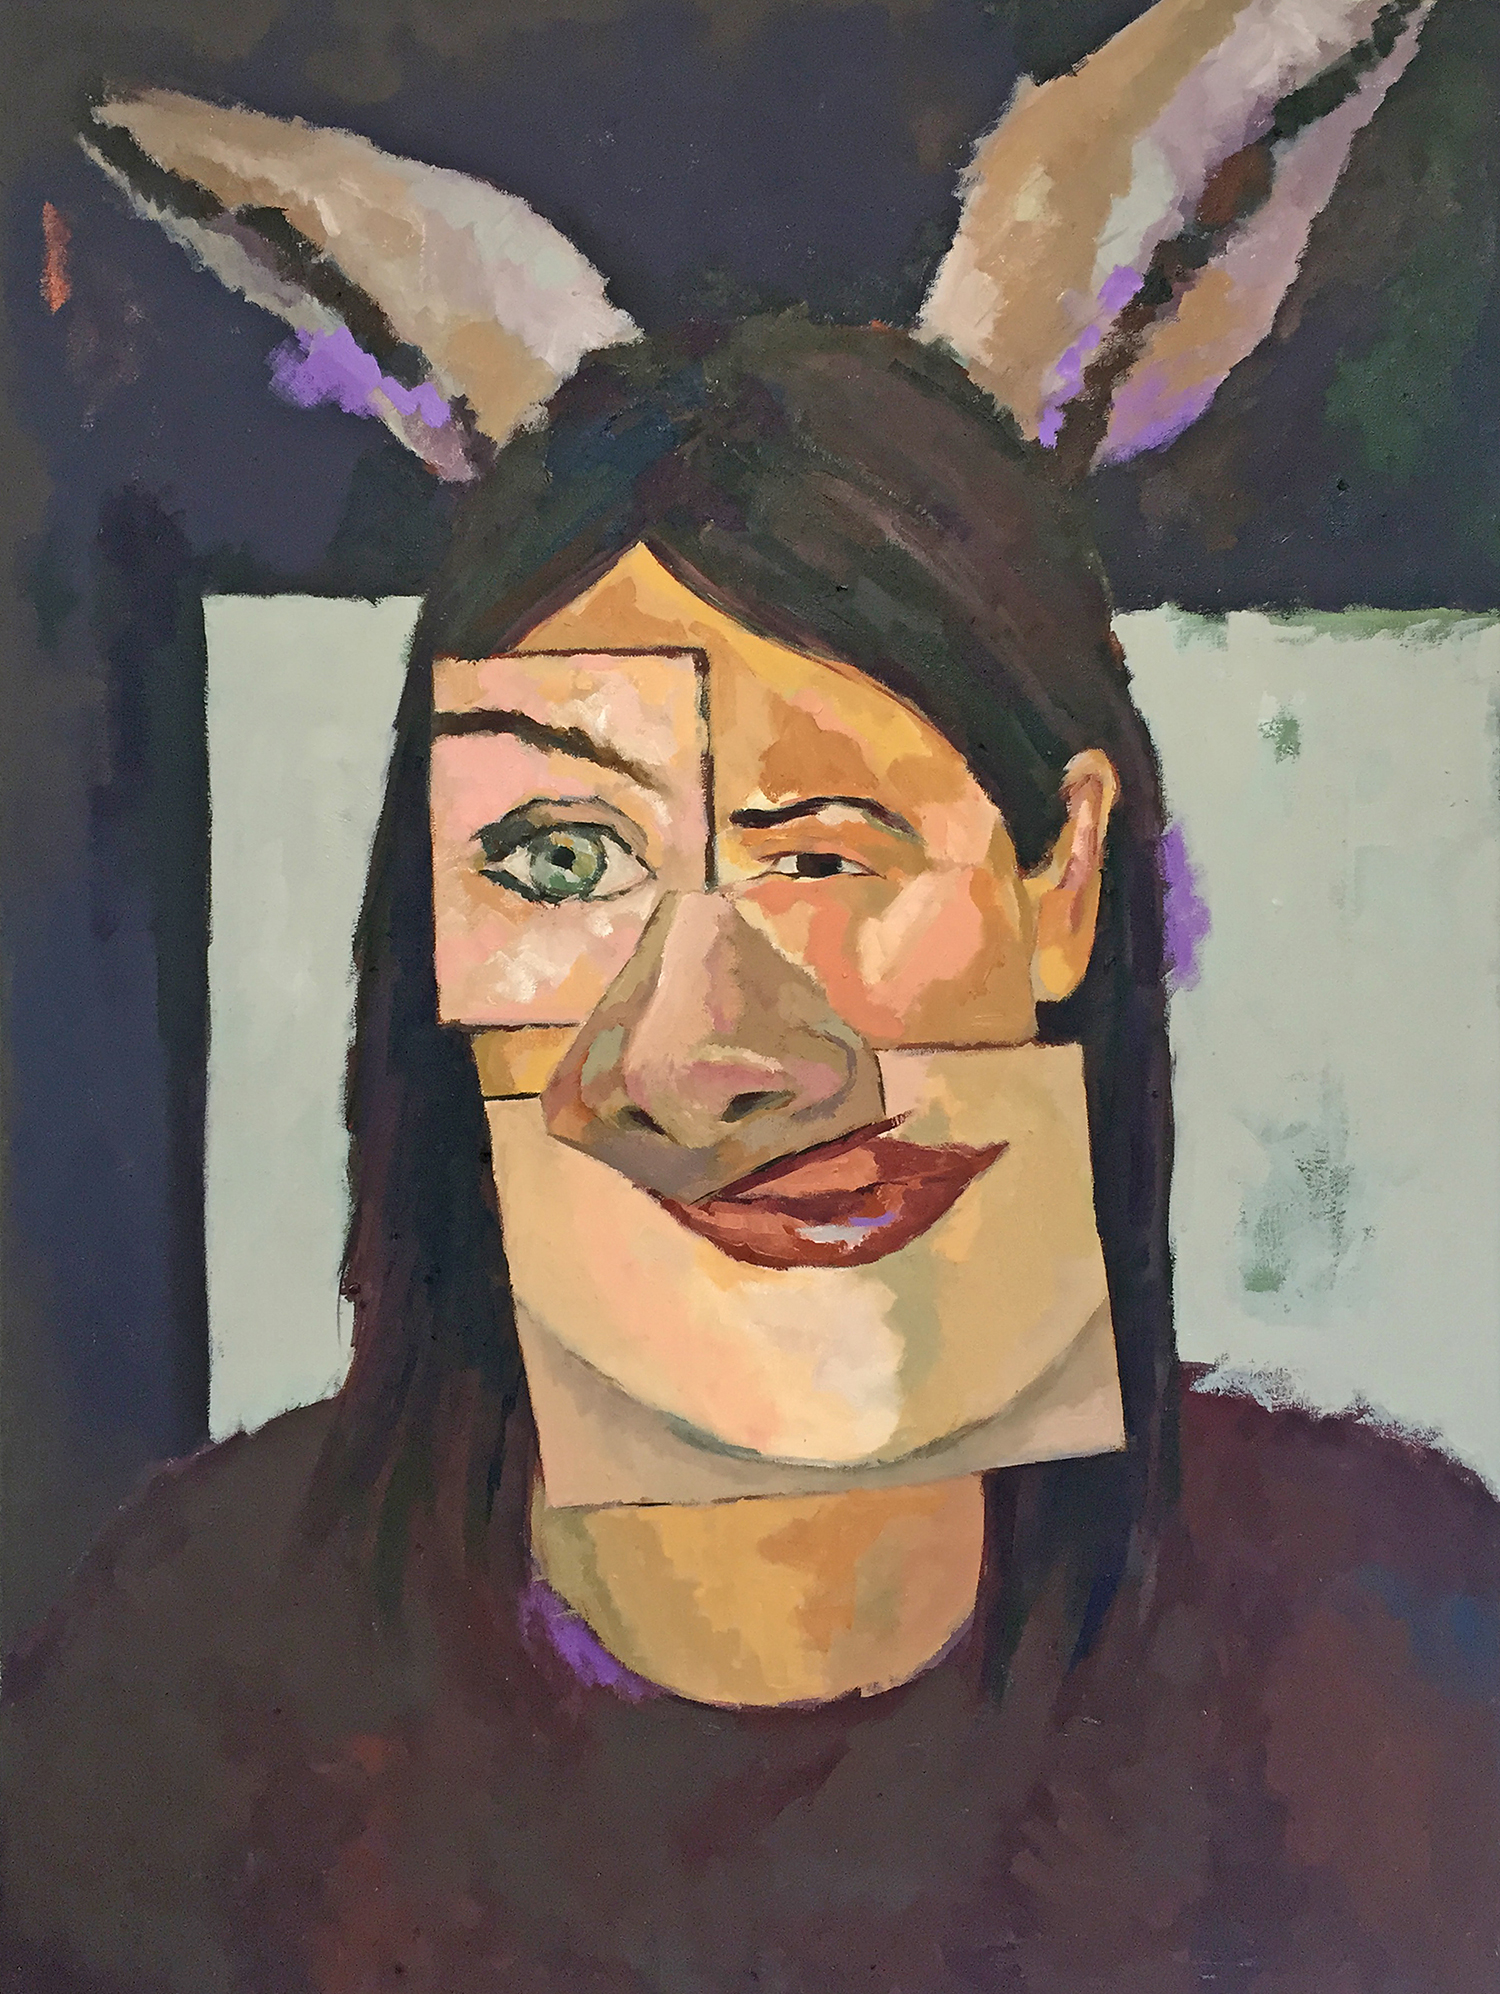 Diane Williams, Guise, 2015. Oil on canvas, 30 x 40 in.